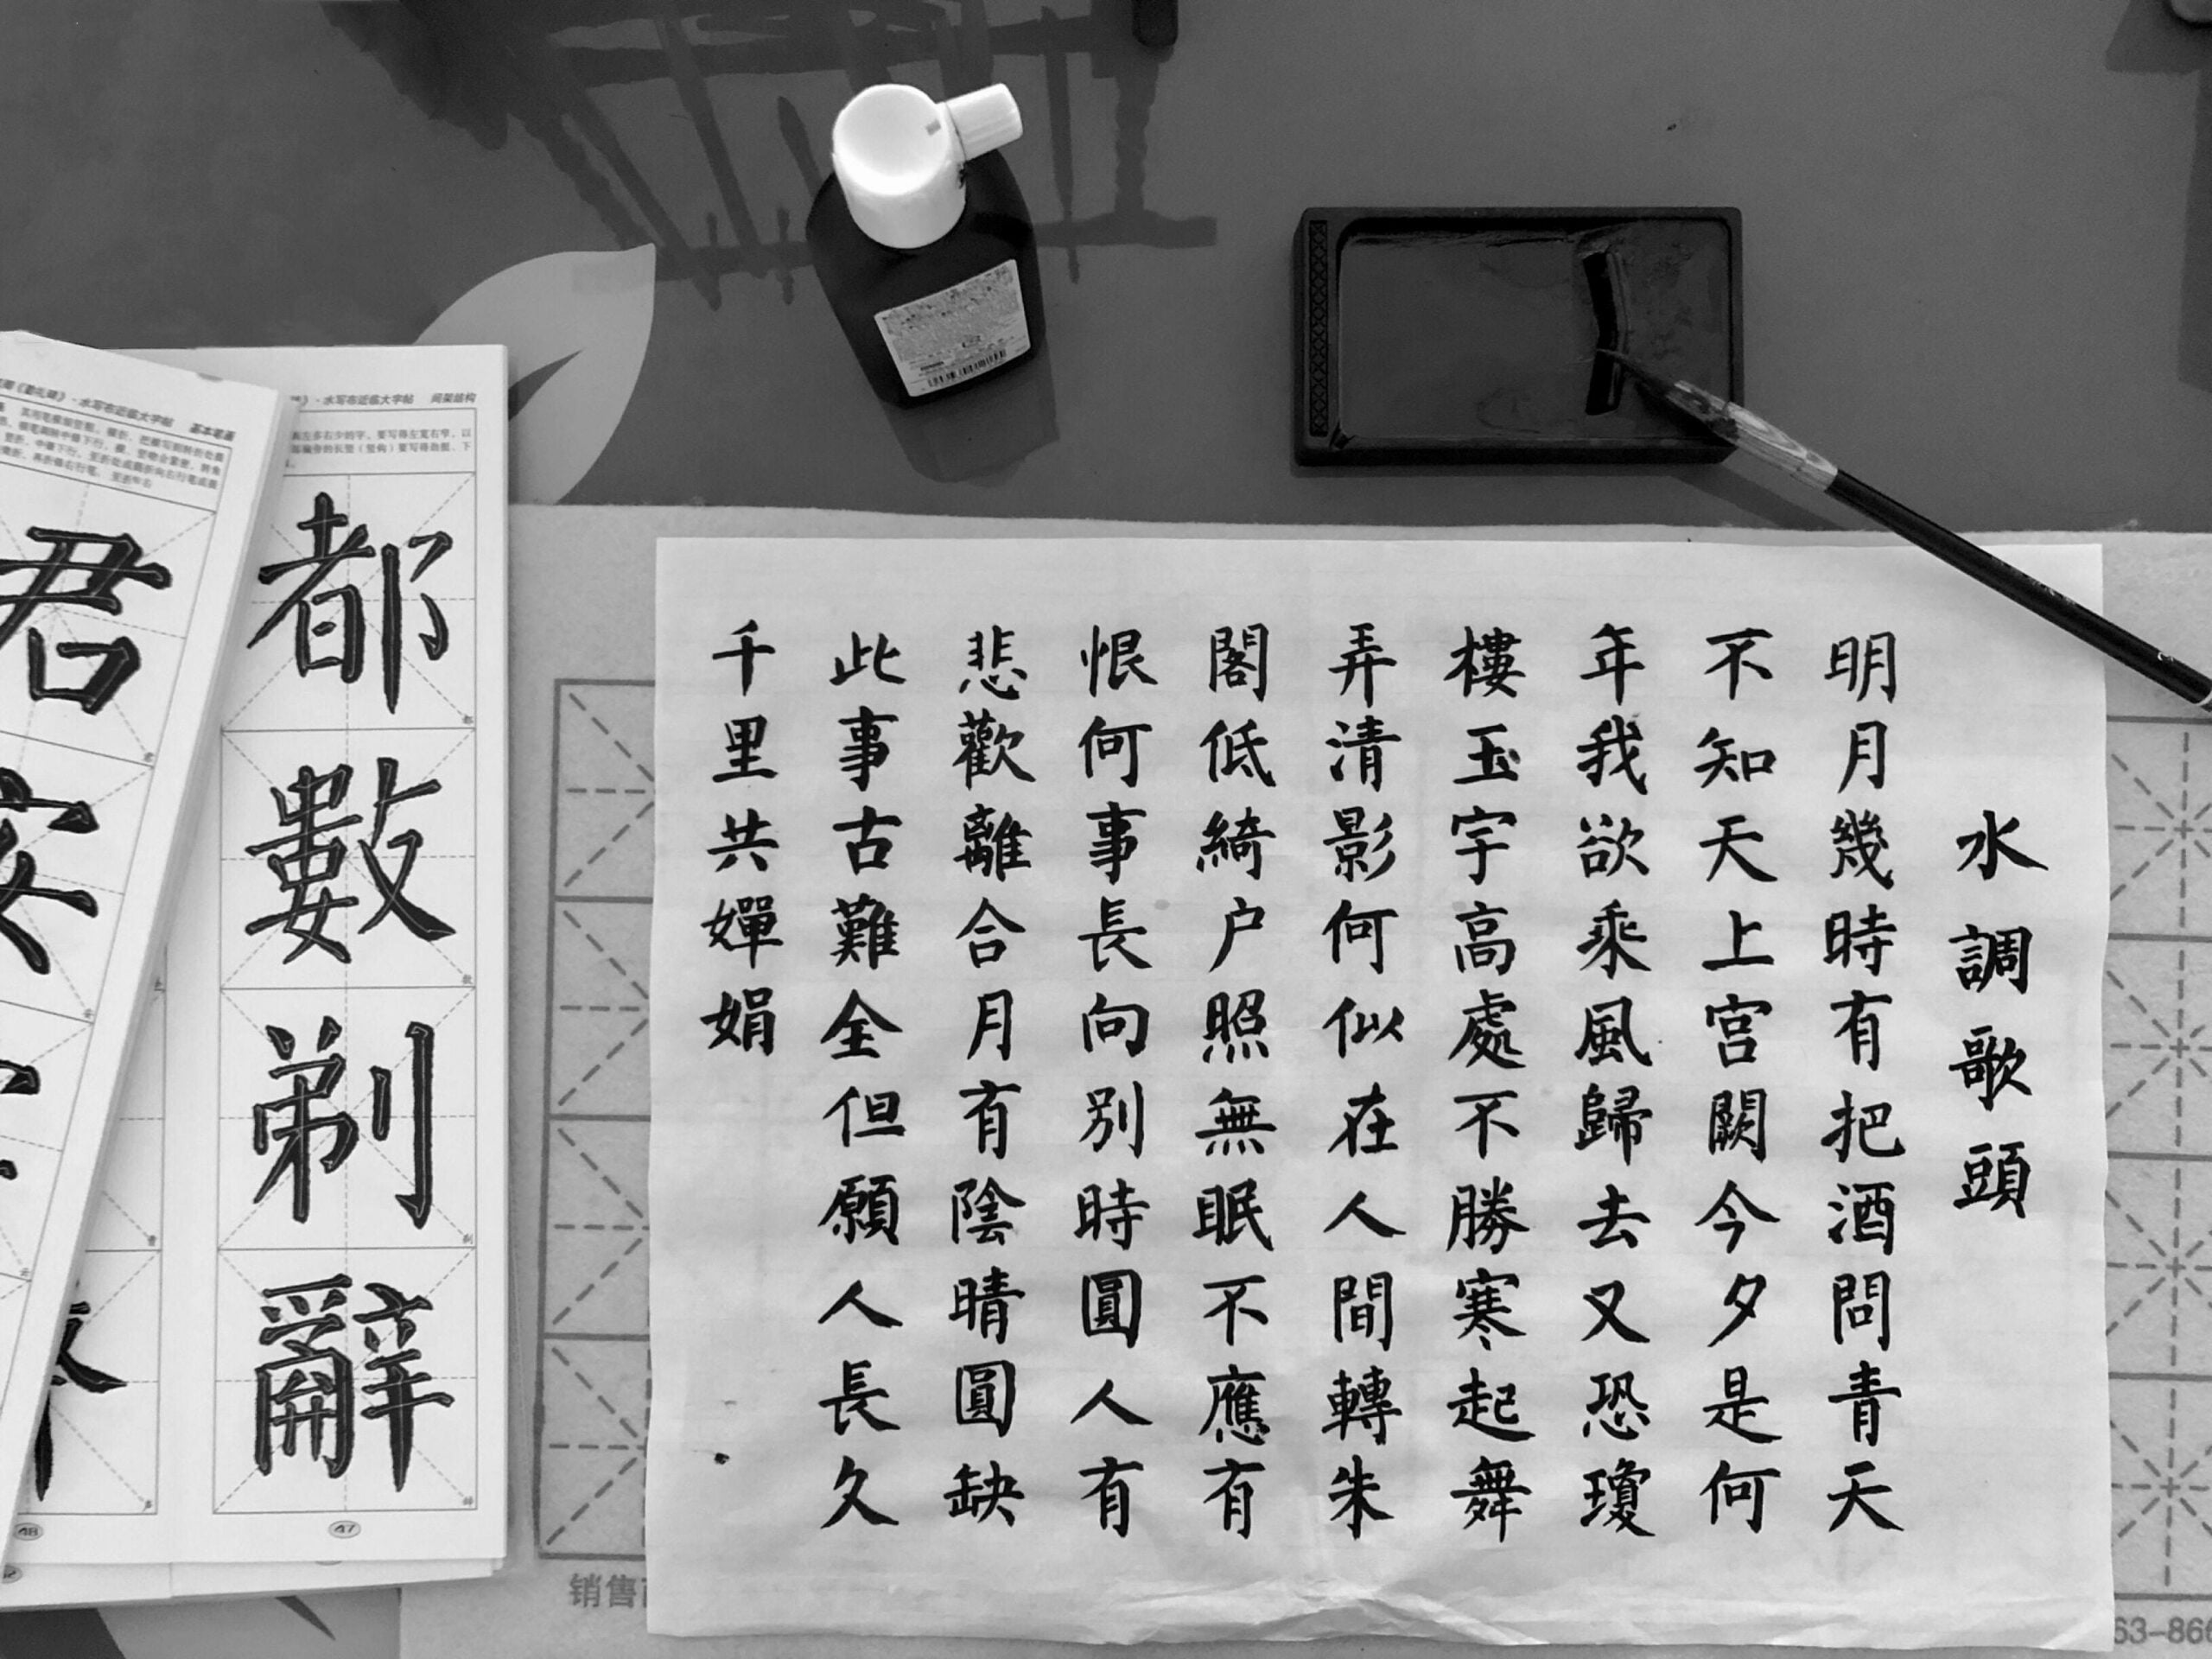 Chinese calligraphy fun facts